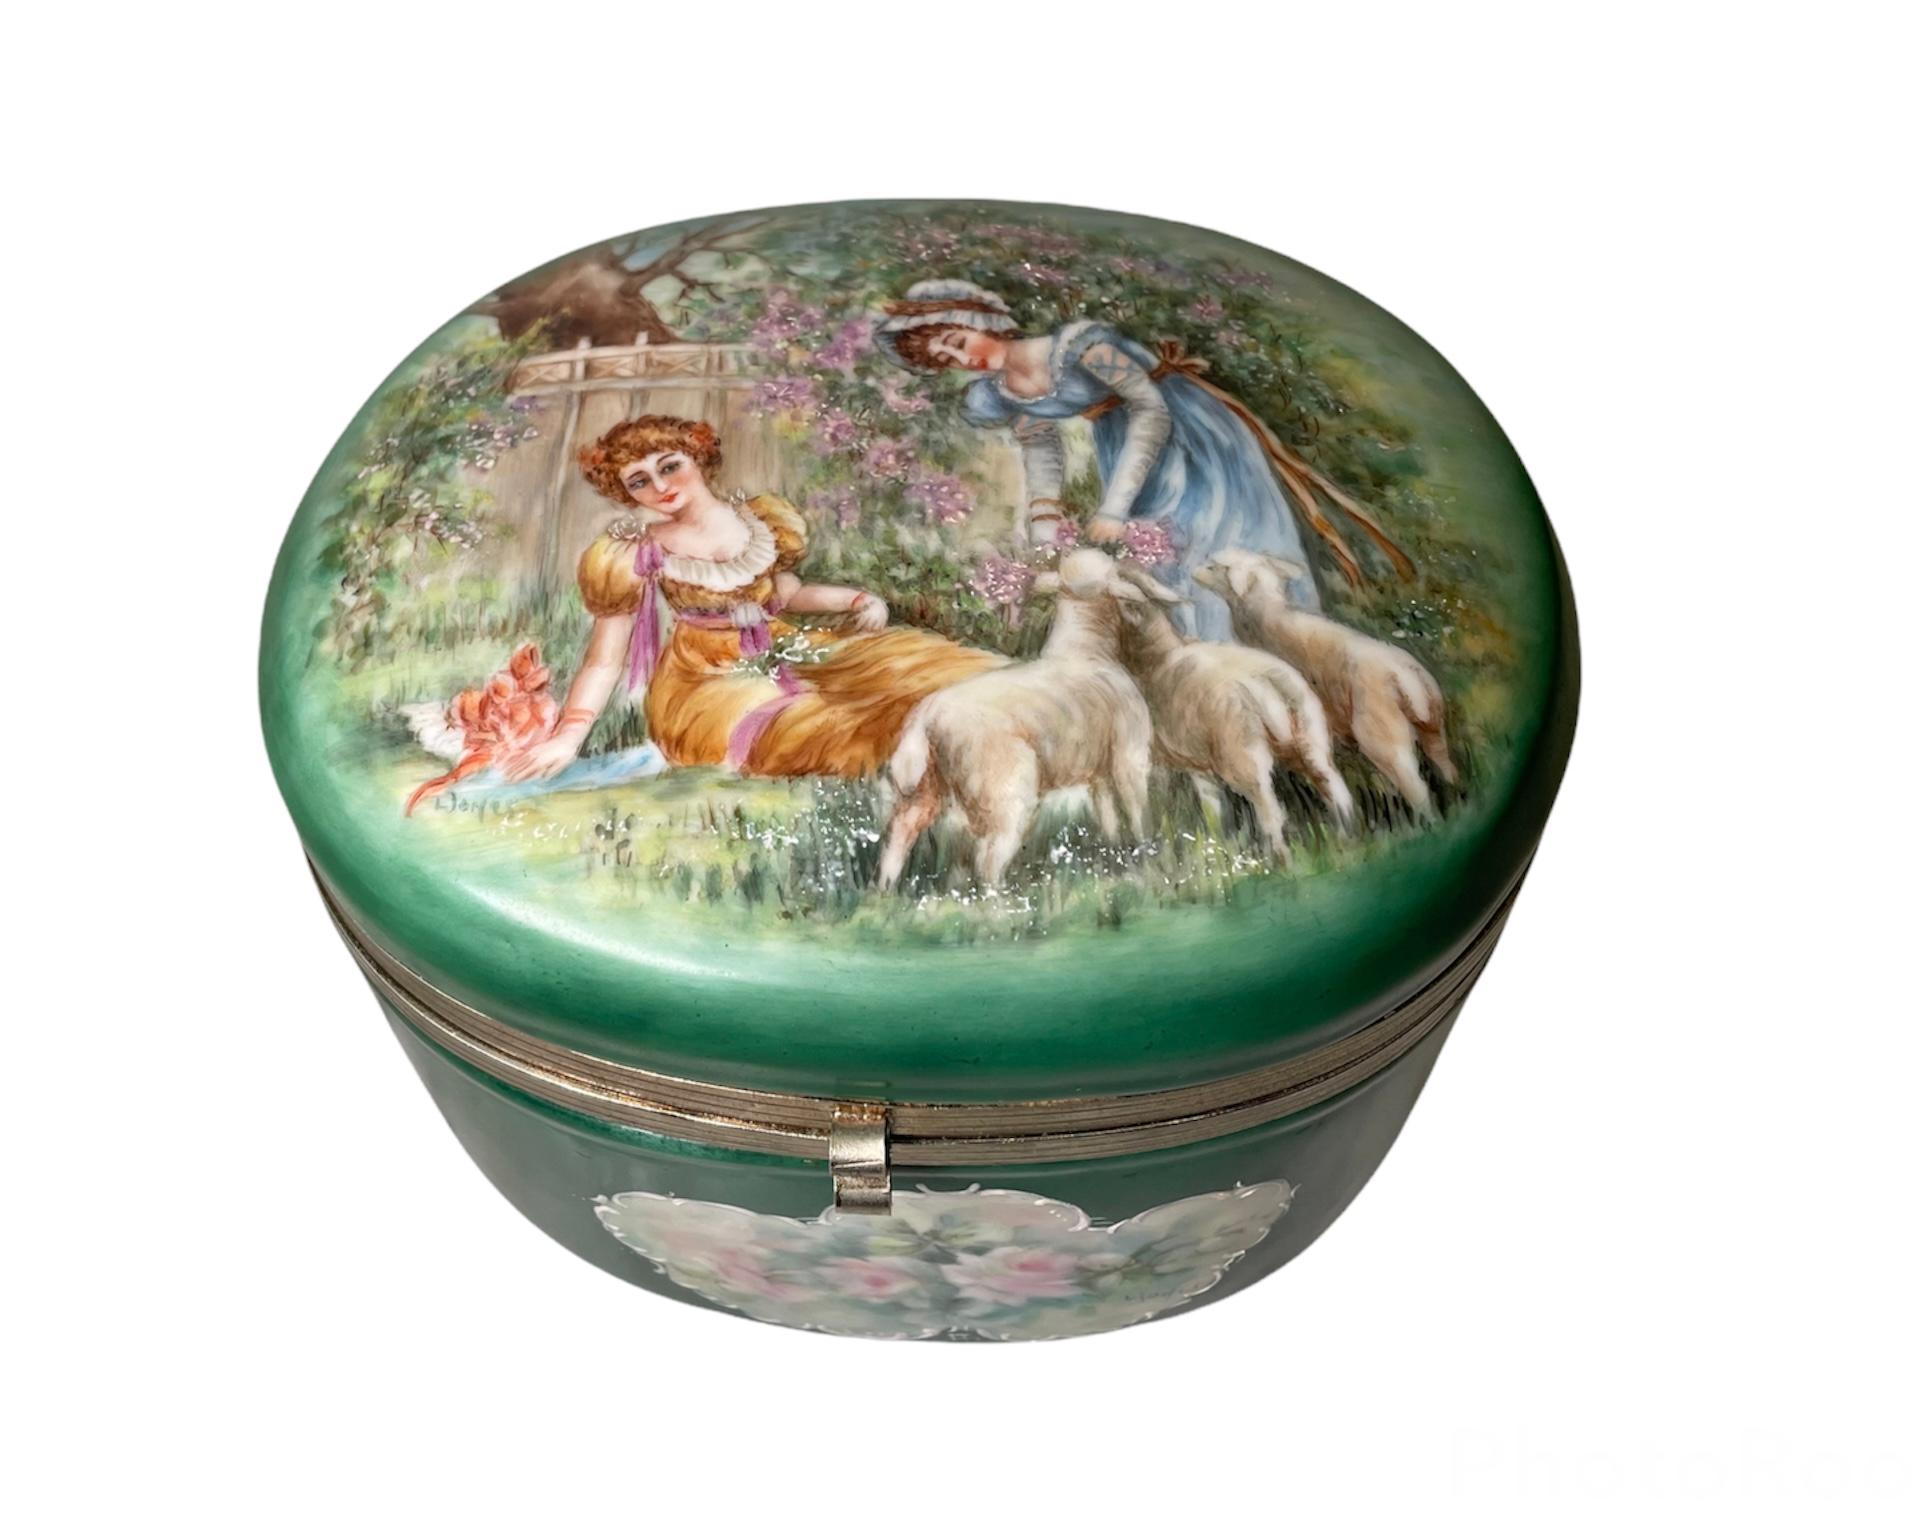 This a large oval hand painted porcelain vanity box. It depicts a scene of two Victorian young ladies in a garden. One of the ladies is seated in the green grass observing the other one that has some flowers in her hands while some lambs are trying